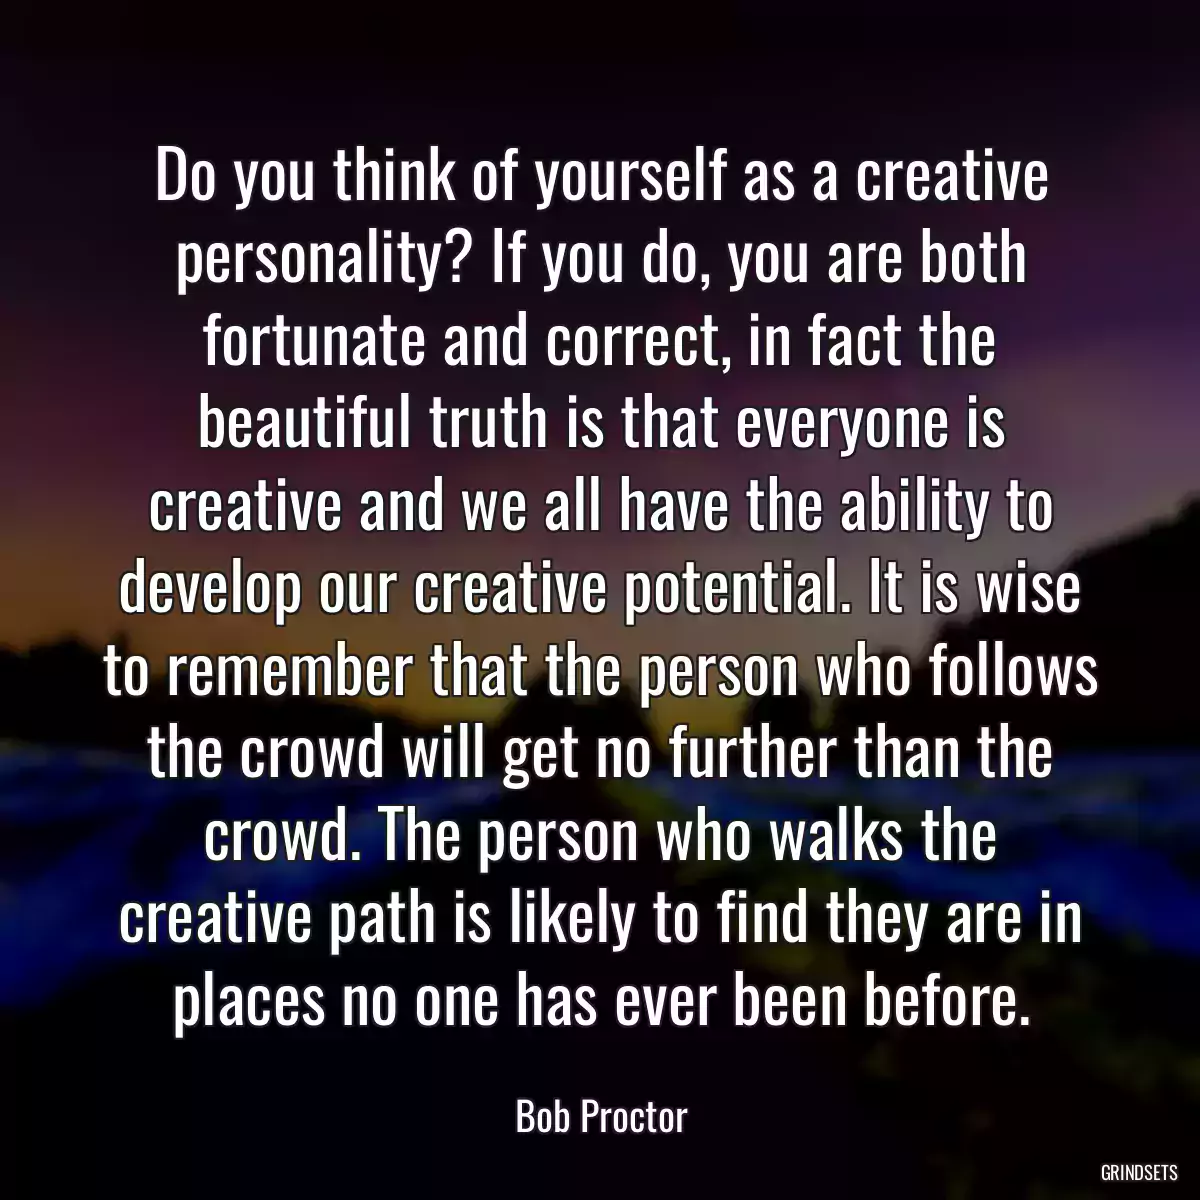 Do you think of yourself as a creative personality? If you do, you are both fortunate and correct, in fact the beautiful truth is that everyone is creative and we all have the ability to develop our creative potential. It is wise to remember that the person who follows the crowd will get no further than the crowd. The person who walks the creative path is likely to find they are in places no one has ever been before.